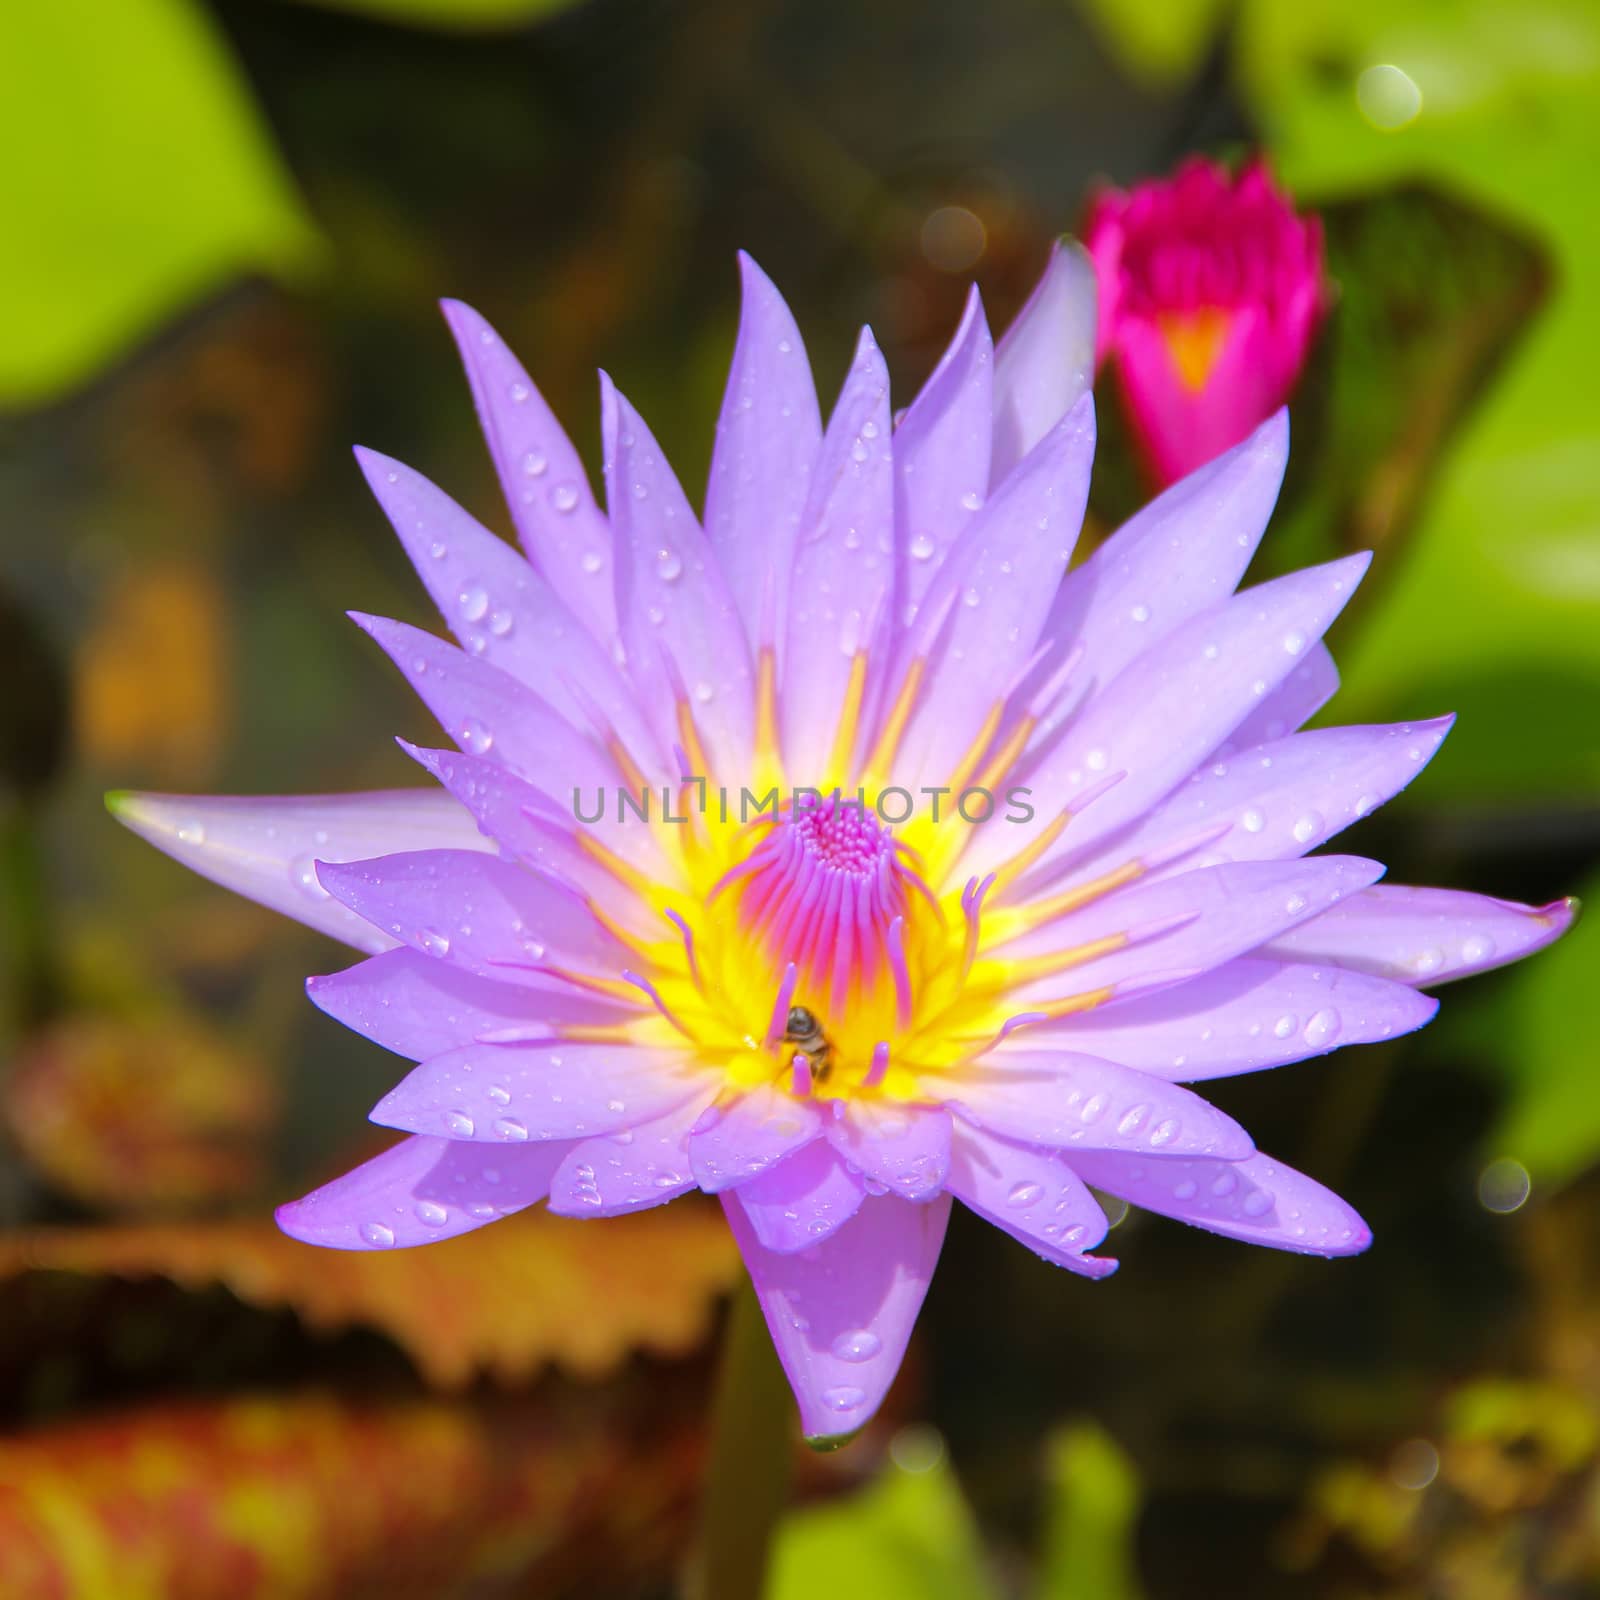 Lotus blossom by liewluck